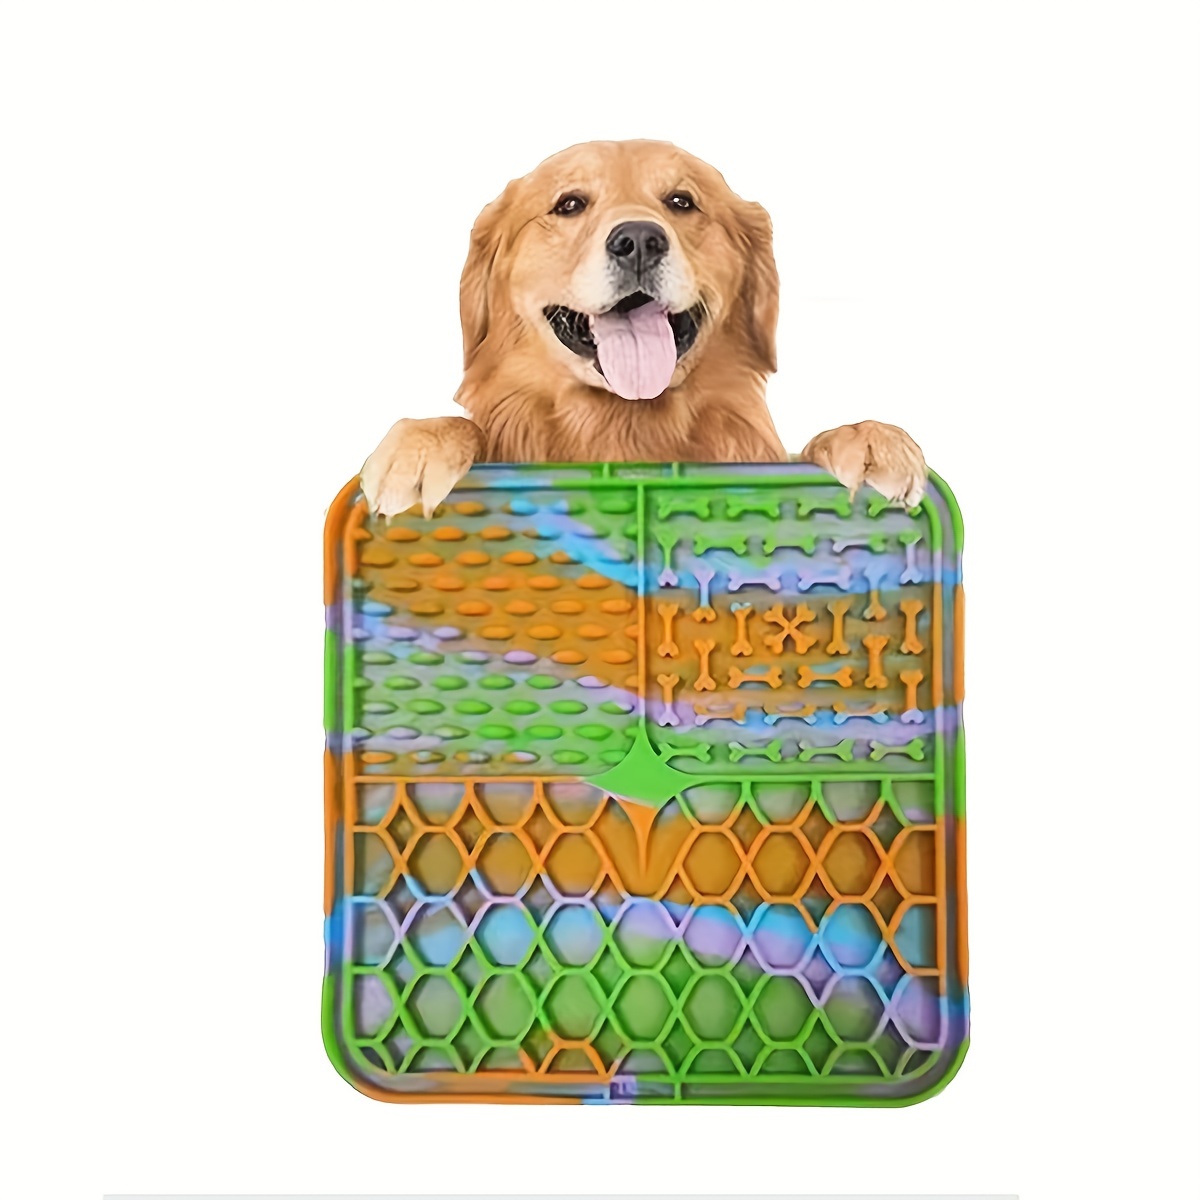 Silicone Pet Dog Feeding Mat Dogs Lick Pad Feeder Food Licking